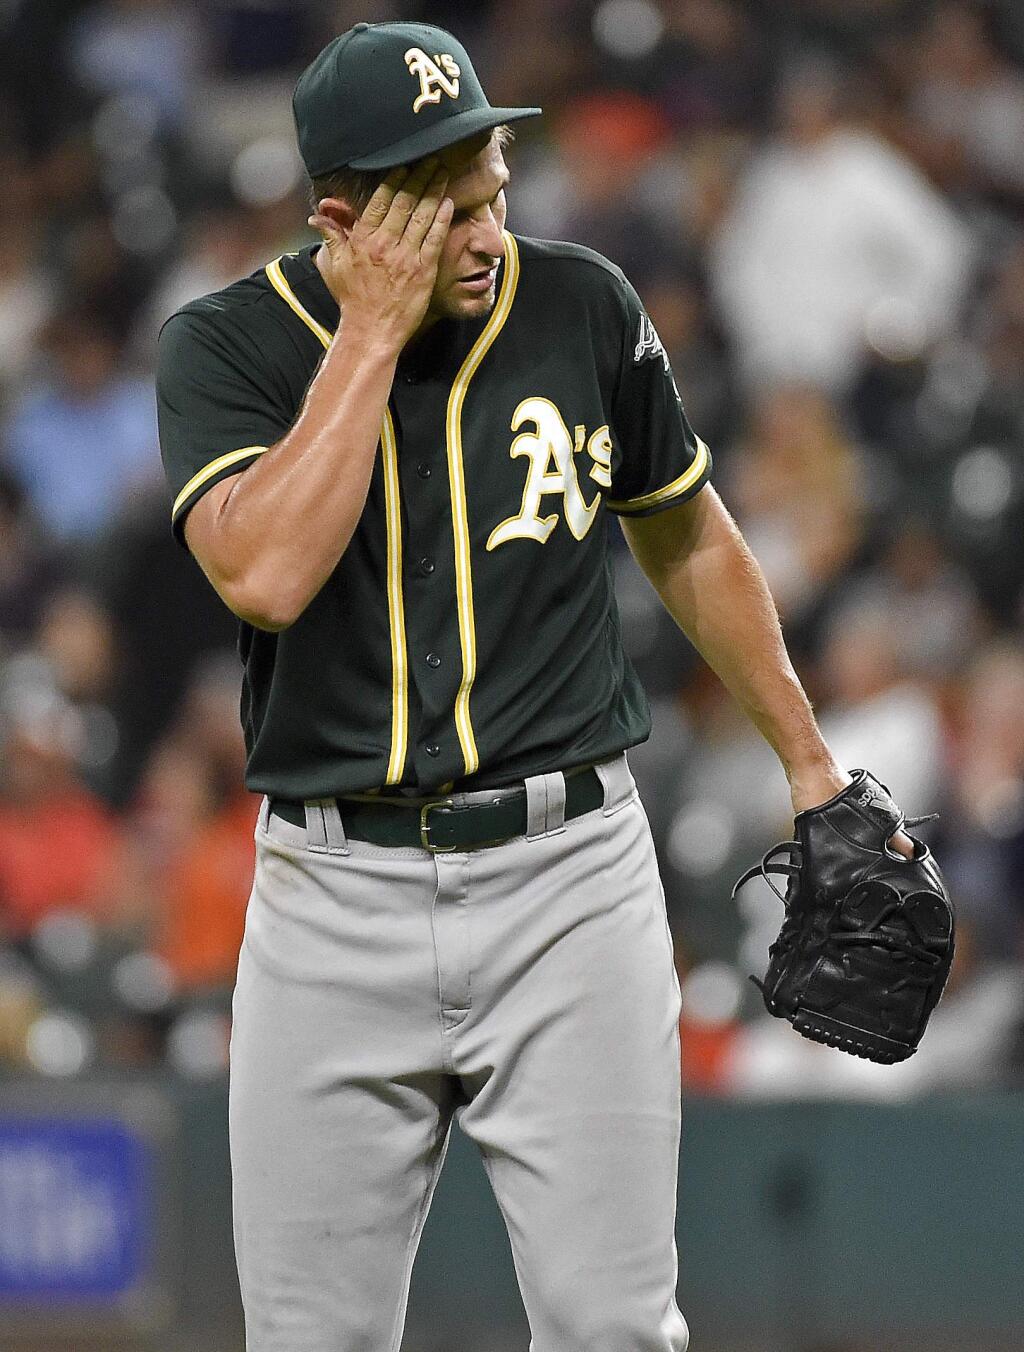 Oakland Athletics starting pitcher Kendall Graveman reacts after giving up a solo home run to Houston Astros' Evan Gattis during the seventh inning of a baseball game Tuesday, Aug. 30, 2016, in Houston. (AP Photo/Eric Christian Smith)